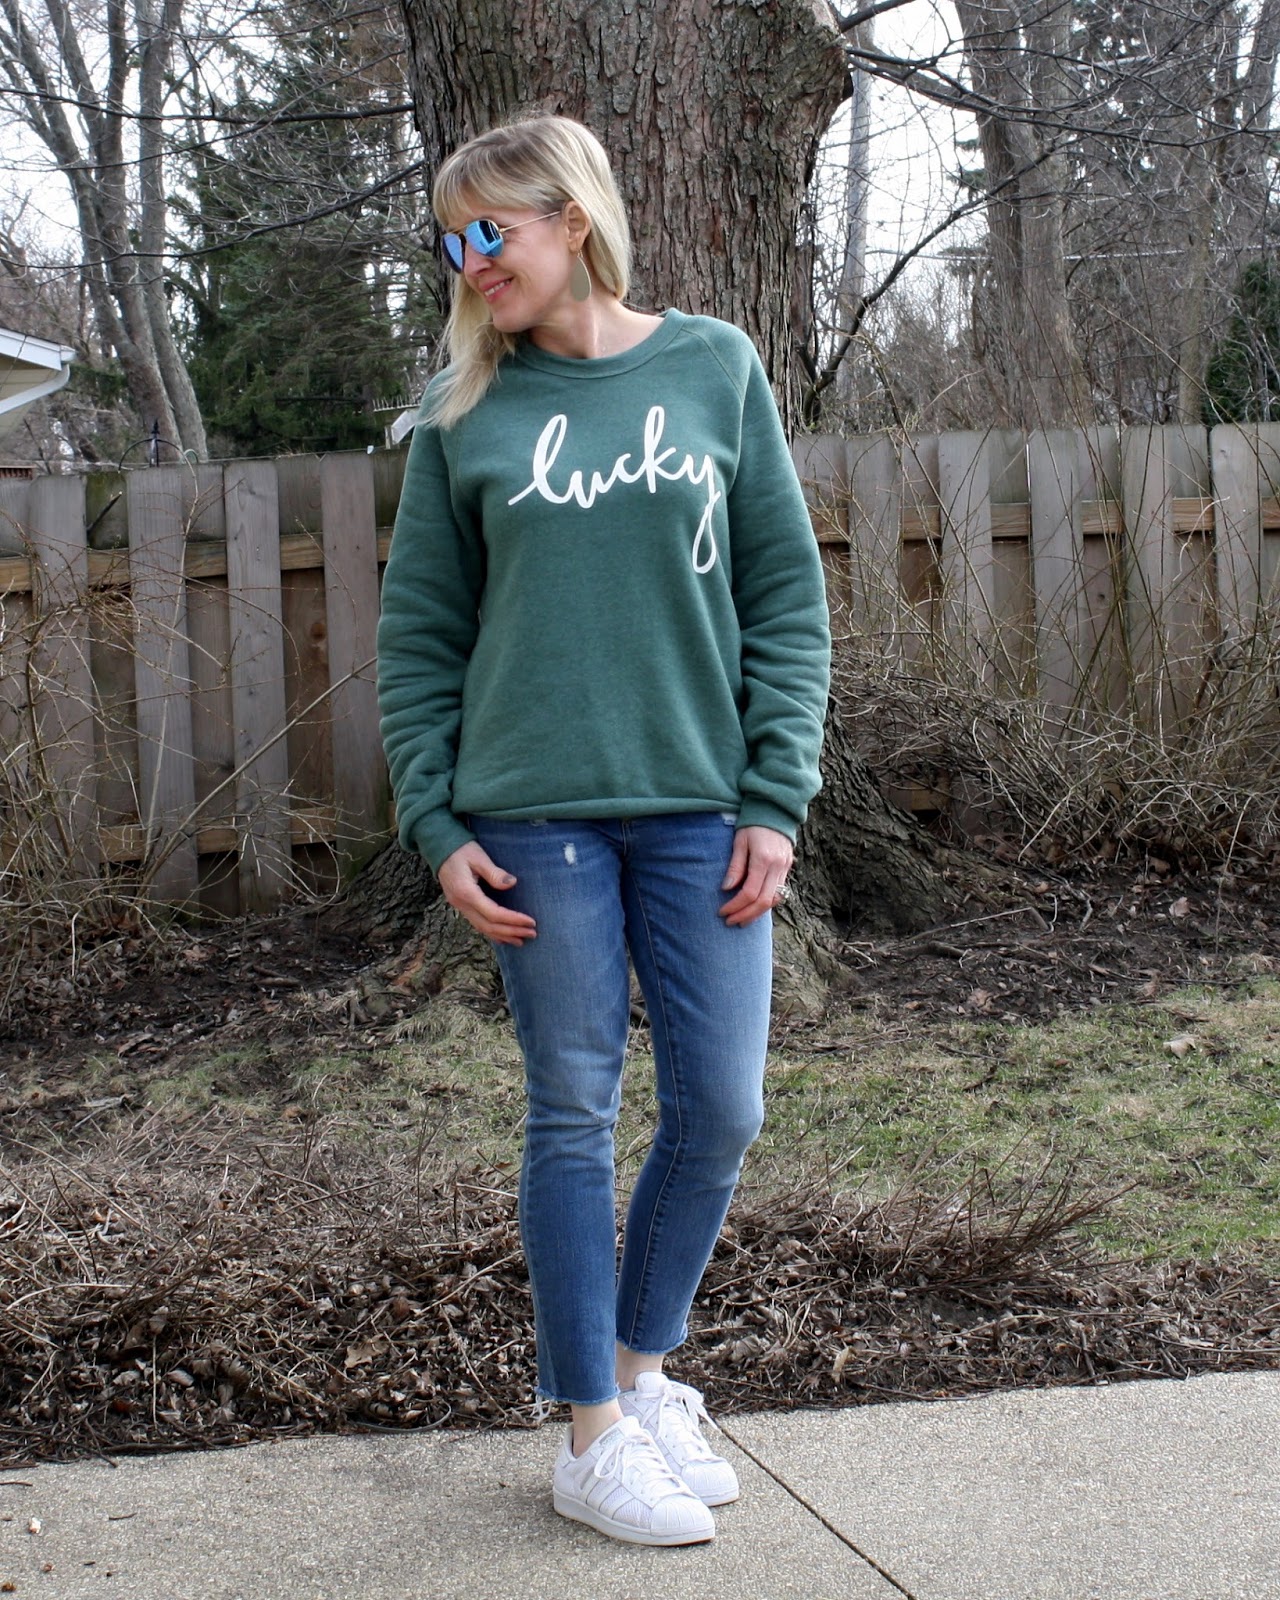 St Patricks Day Outfits You Need To Recreate – By Bella Leah